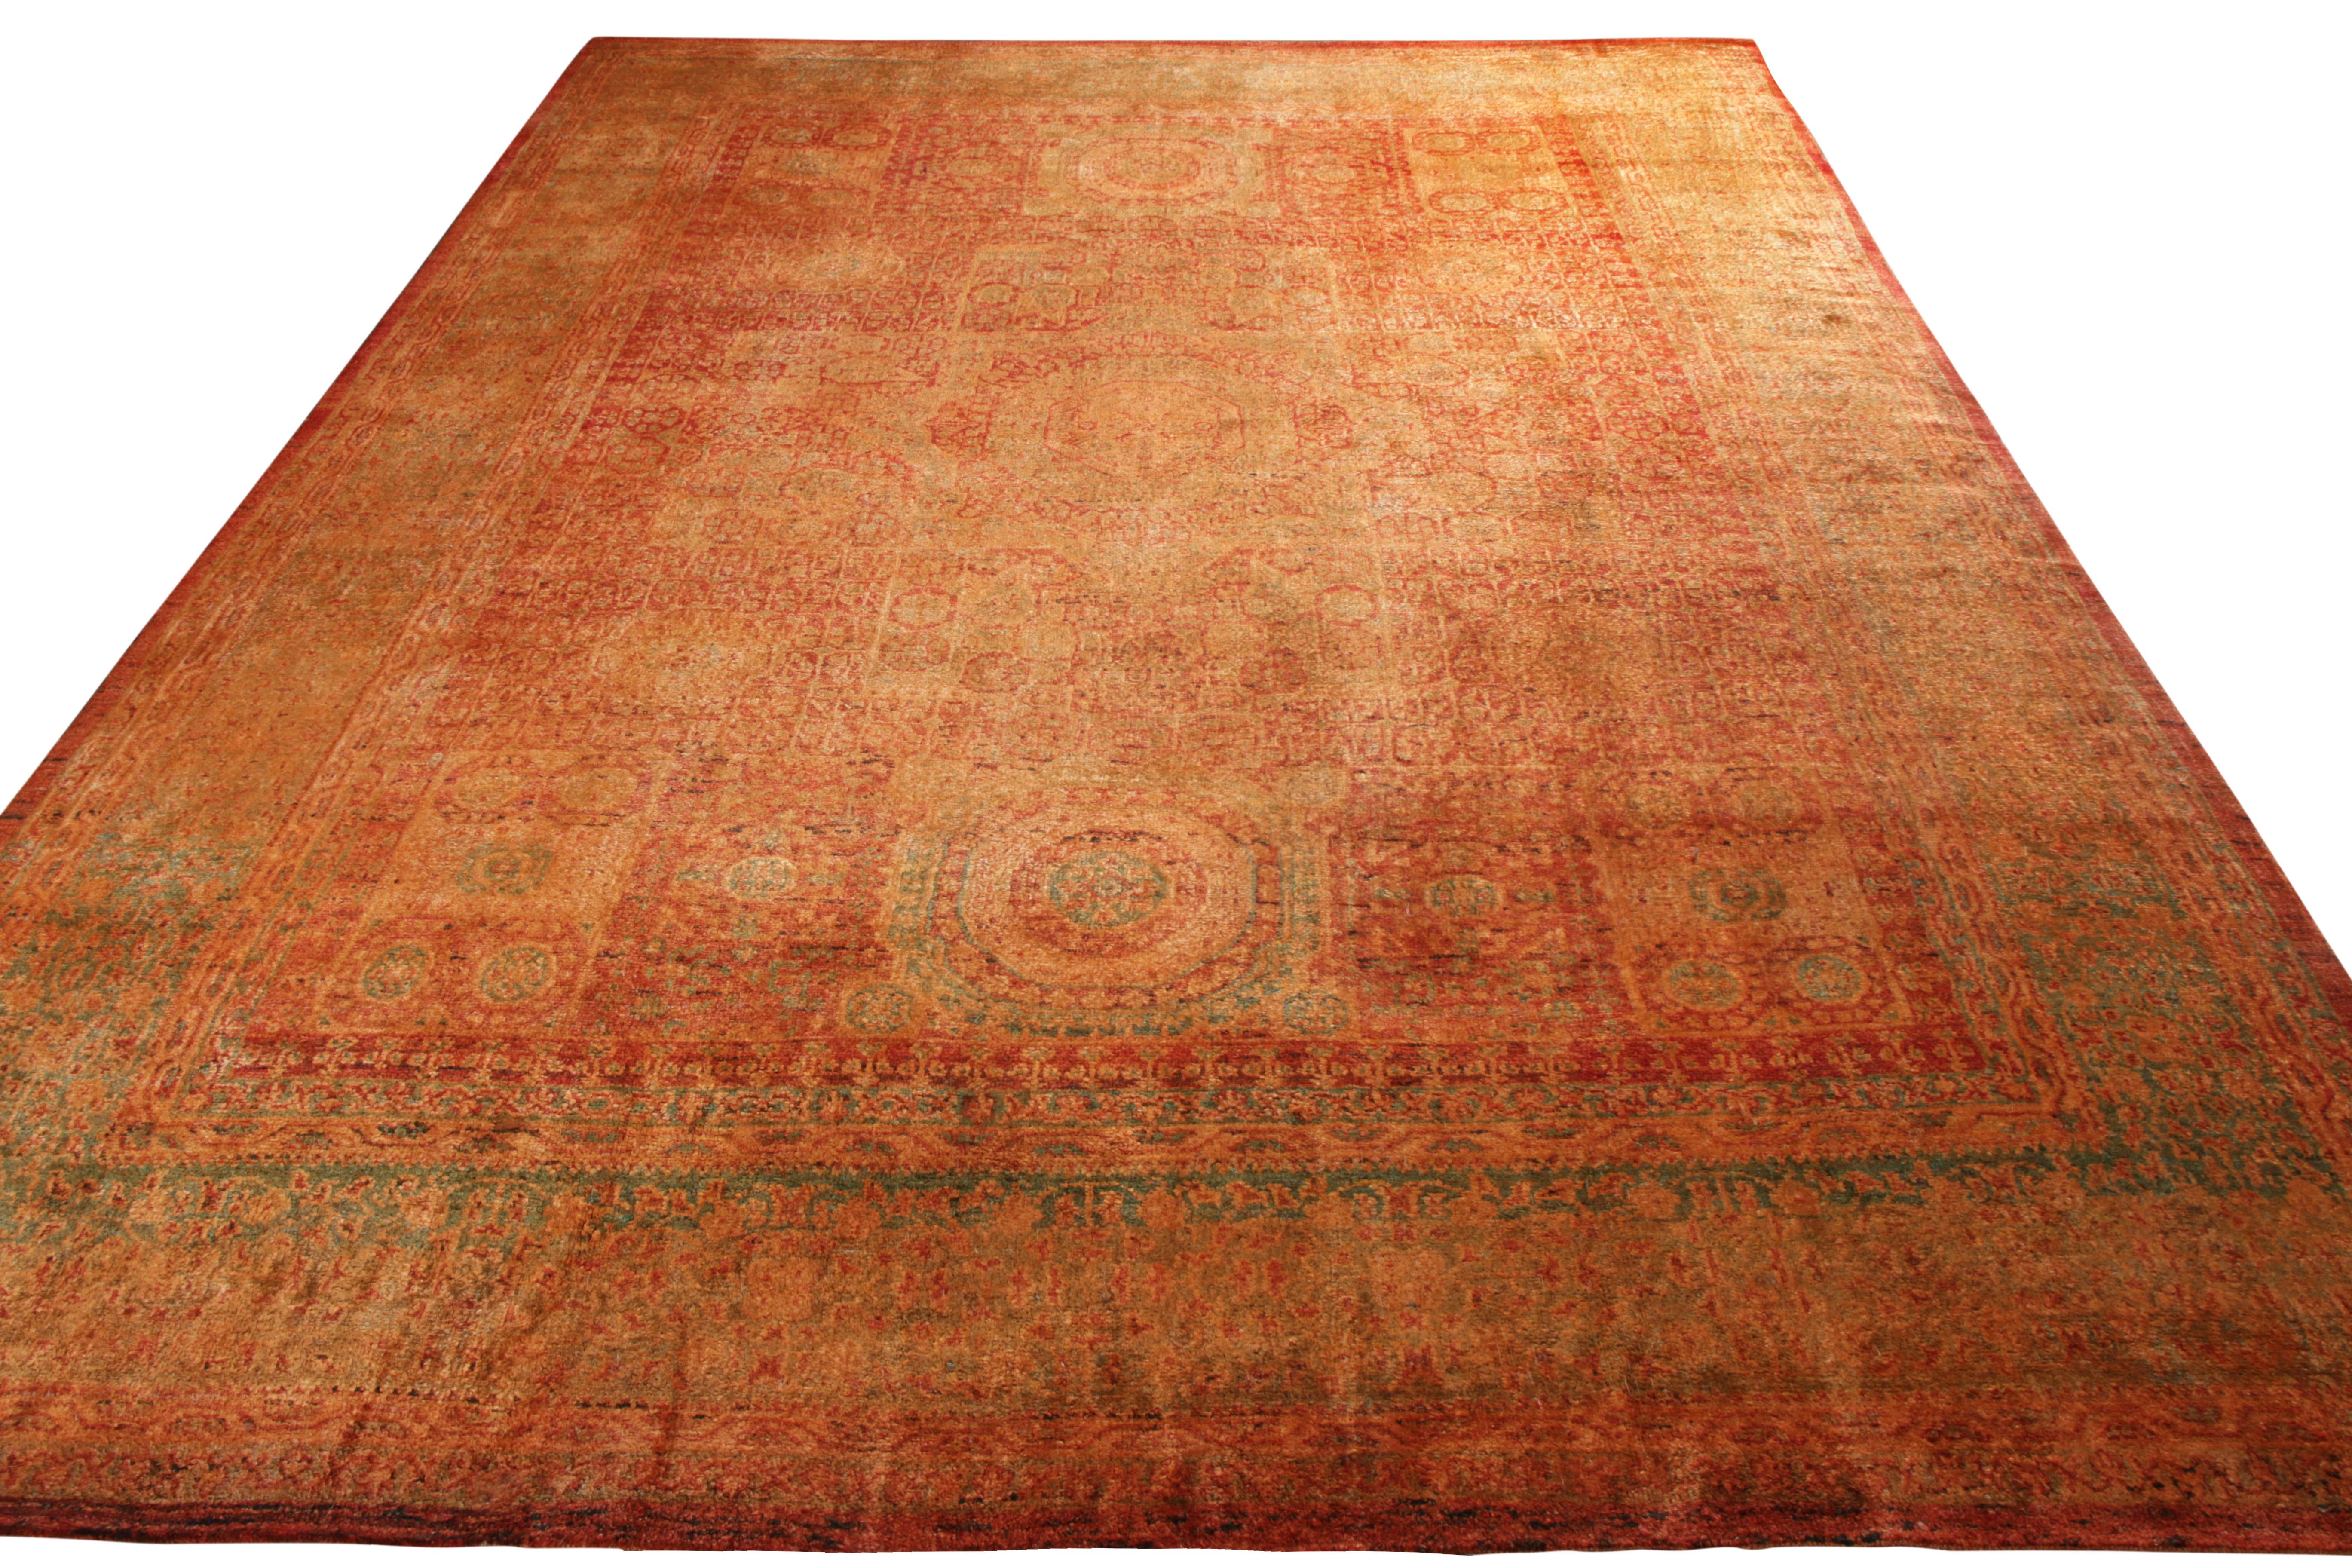 Rejoicing Indian aesthetics, Rug & Kilim presents this 9x13 Agra inspired design from its Modern Classics Collection. Hand knotted in wool and silk for impeccable texture, the piece makes a modern take on classic Indian style with an all over